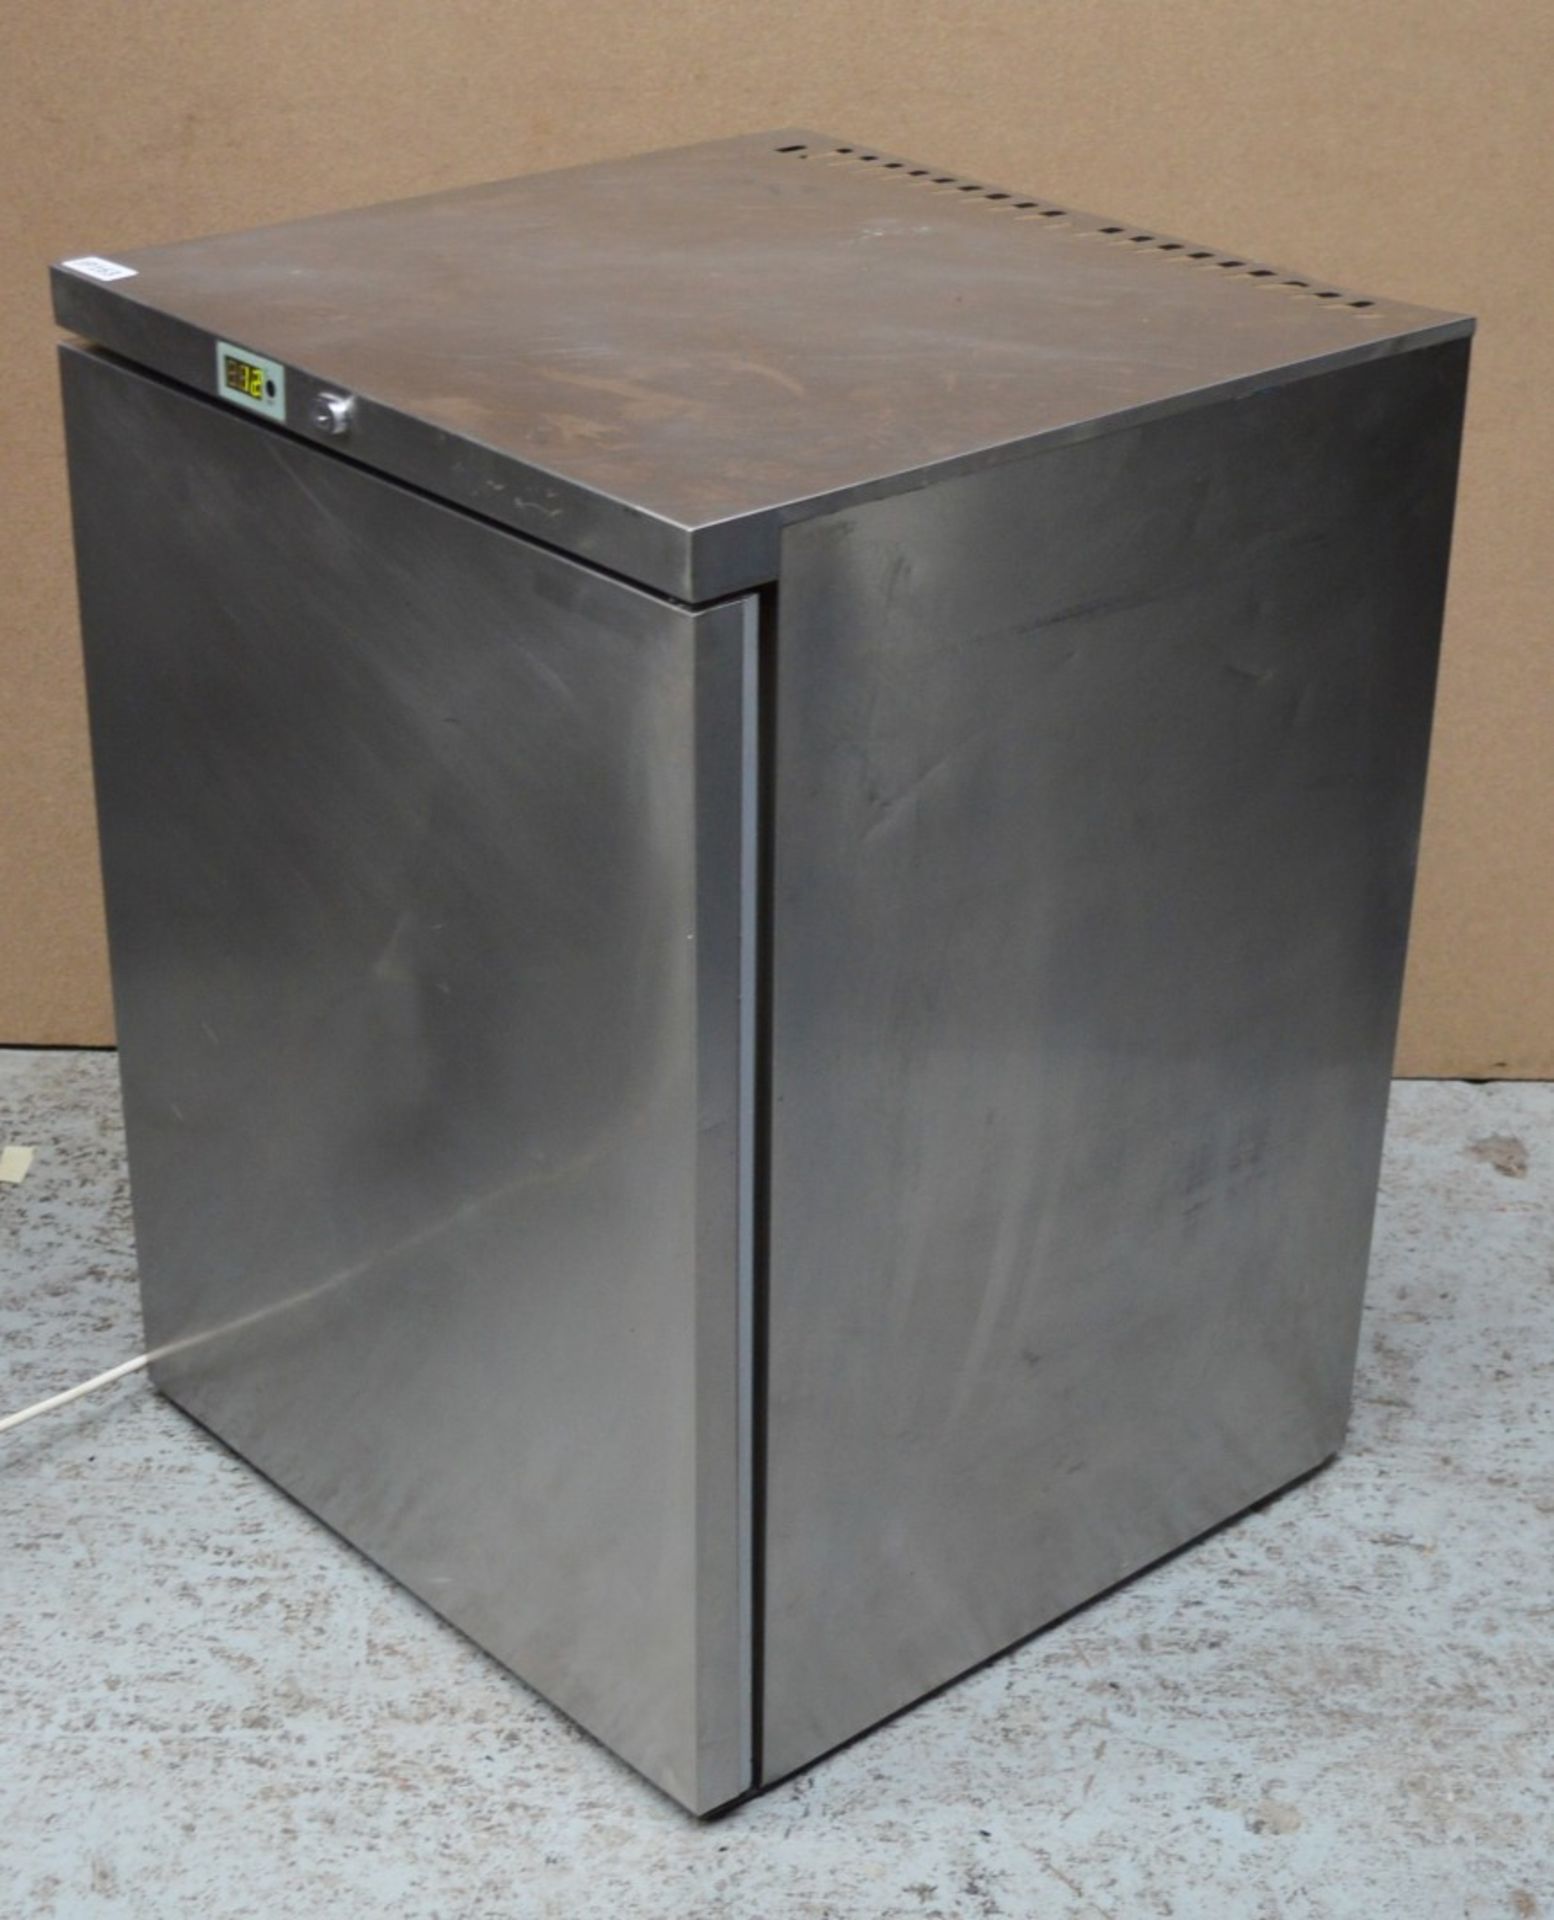 1 x Blizzard Undercounter Freezer - Model UFC140 - Stainless Steel Finish - Suitable For - Image 6 of 7